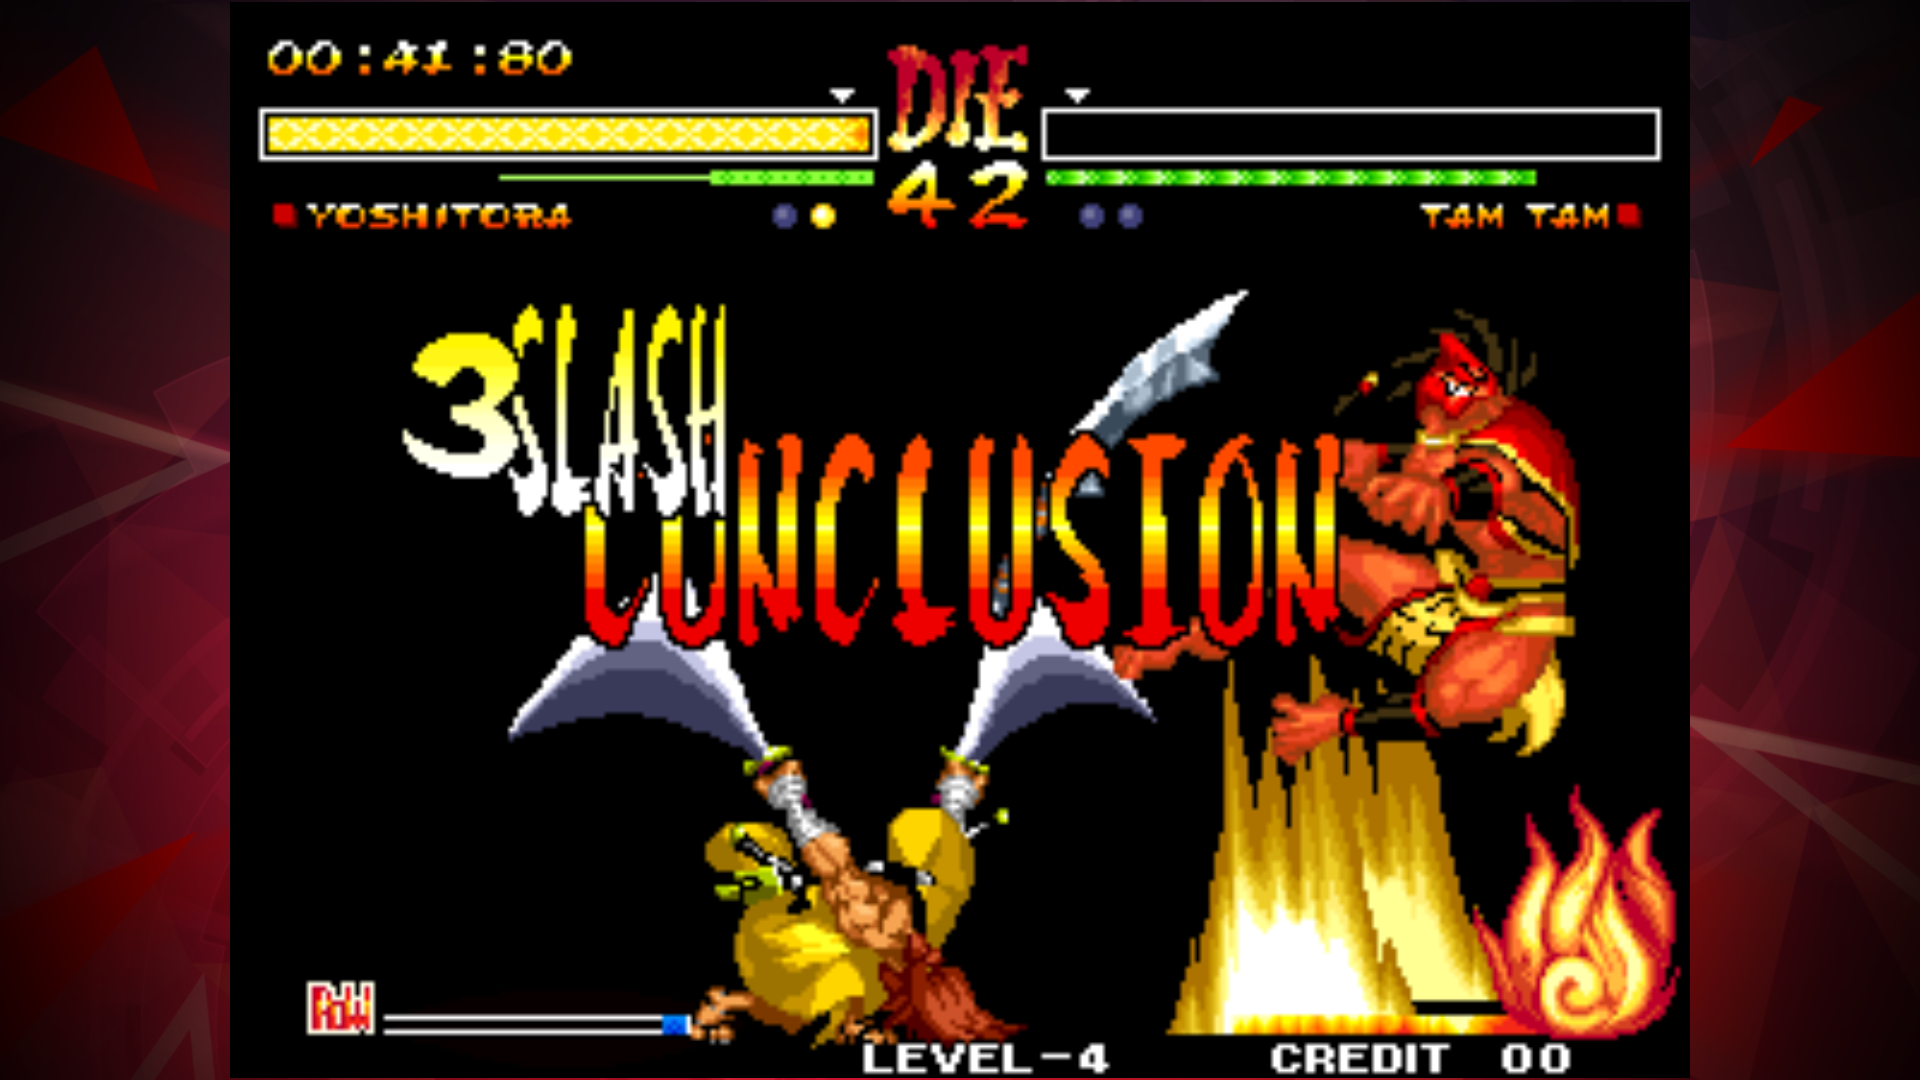 Classic Fighter ‘Samurai Shodown V ACA NeoGeo’ From SNK and Hamster Is Out Now on iOS and Android